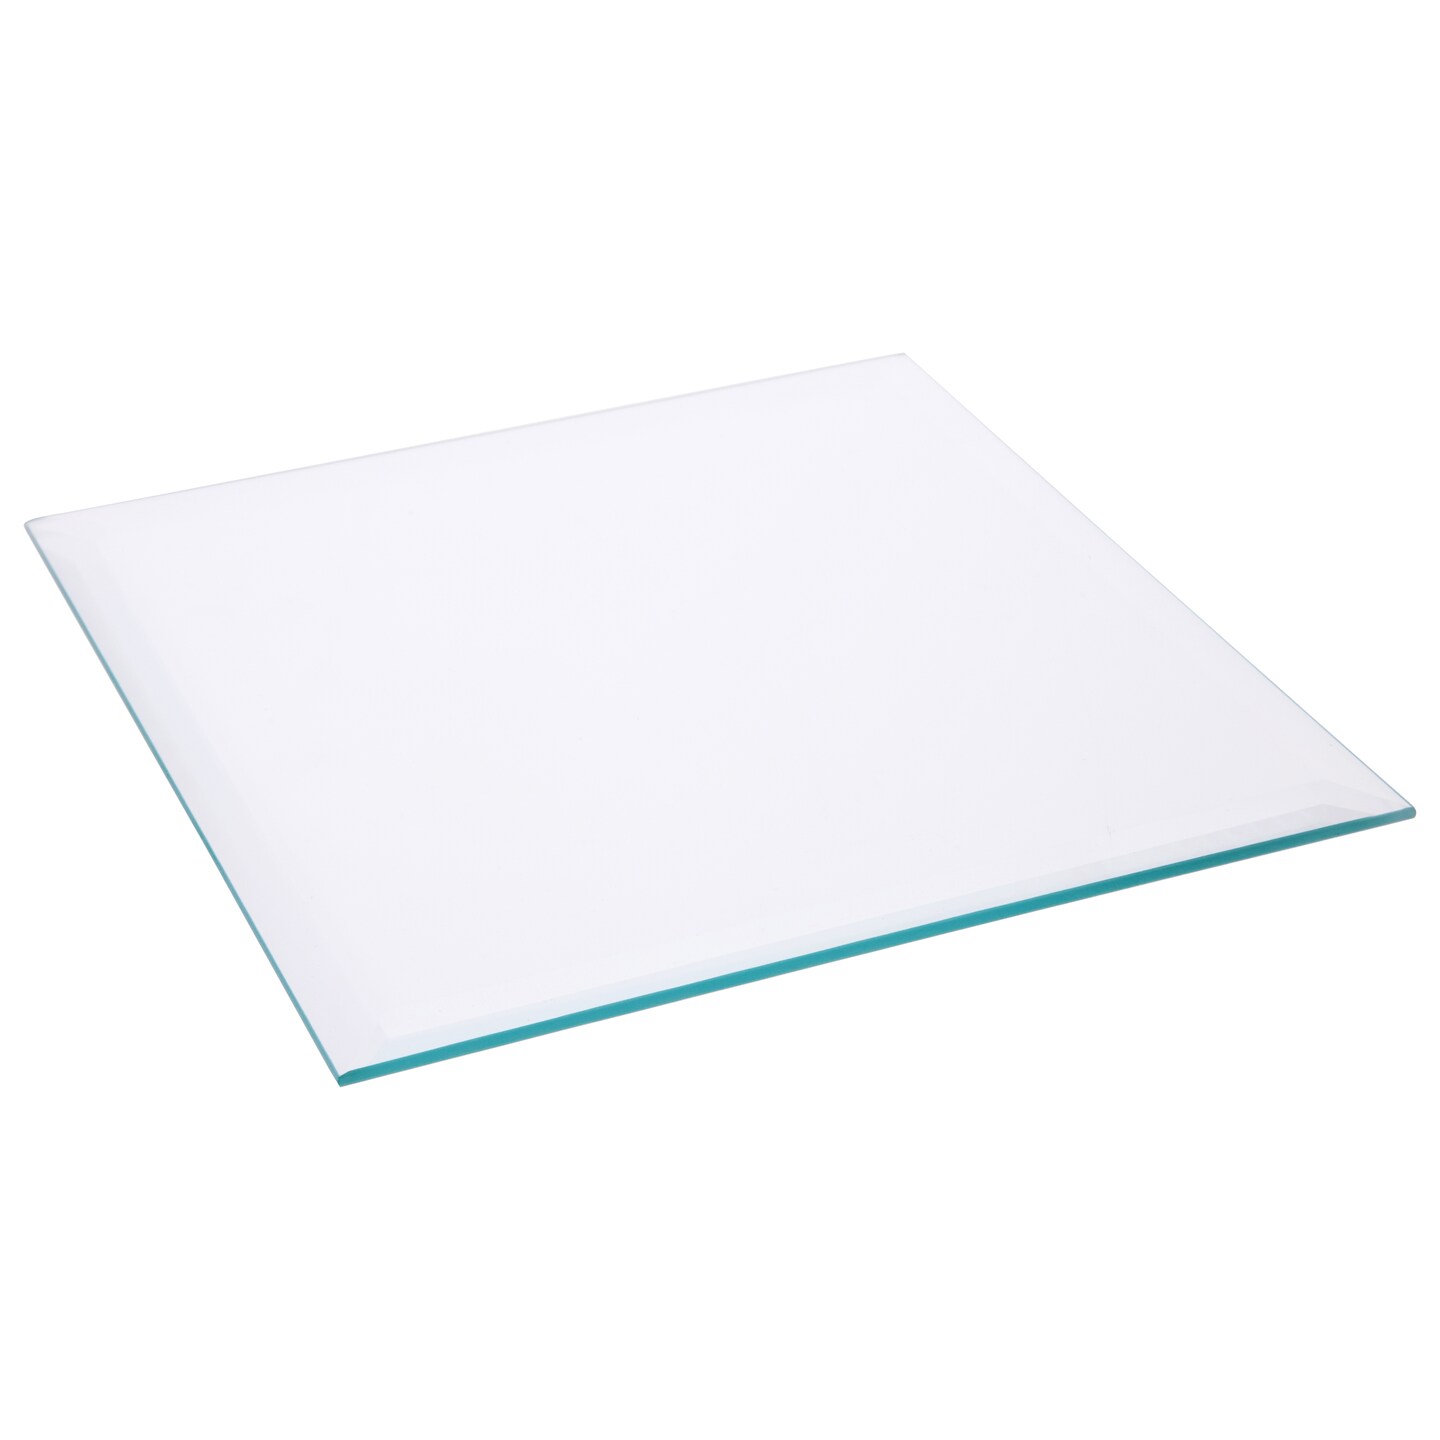 Plymor Square 5mm Beveled Clear Glass, 8 inch x 8 inch